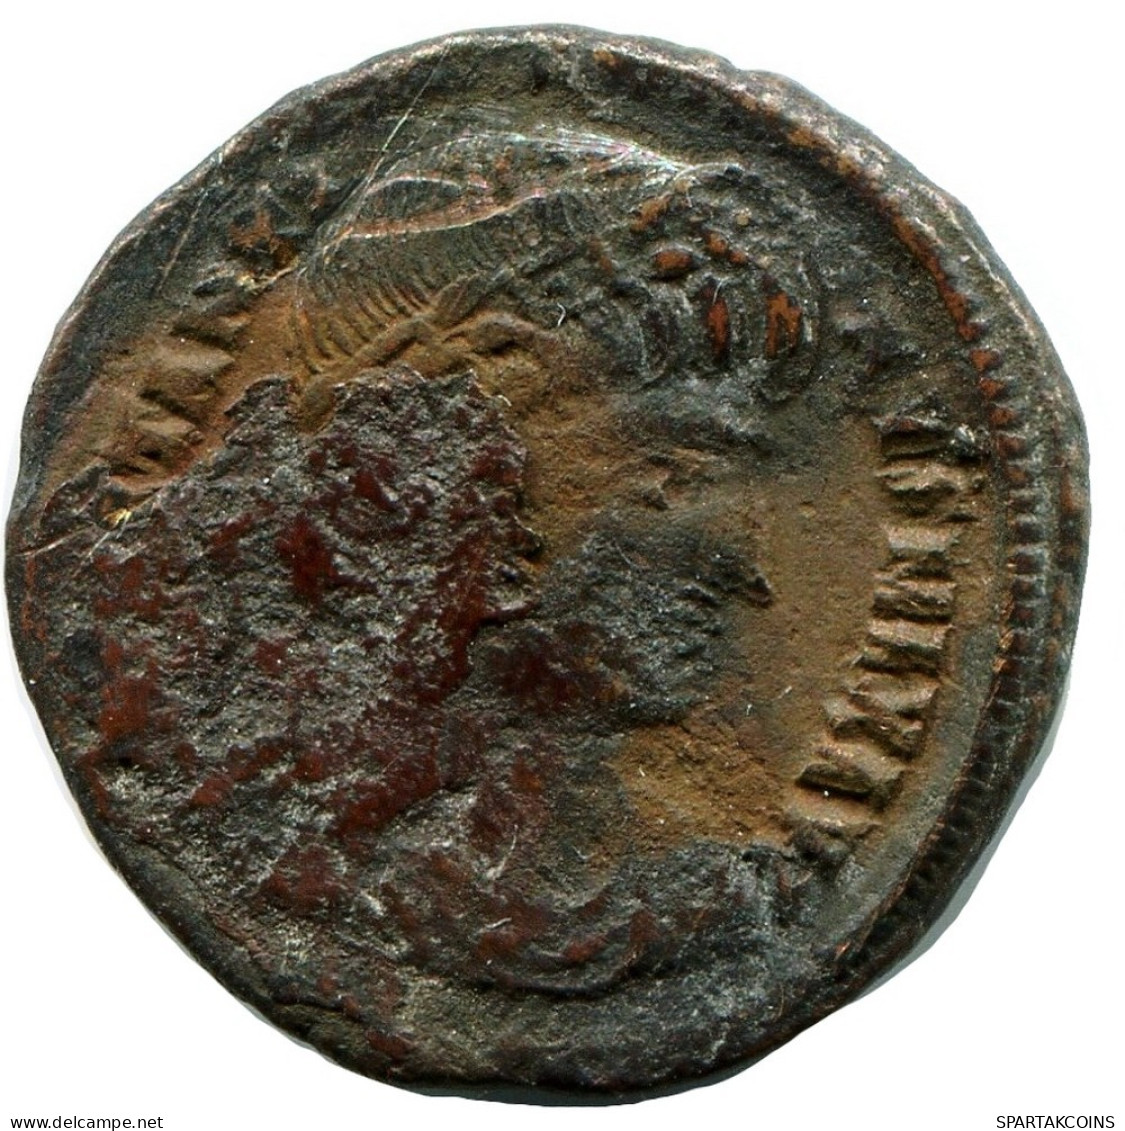 CONSTANTINE I MINTED IN CYZICUS FOUND IN IHNASYAH HOARD EGYPT #ANC10966.14.F.A - The Christian Empire (307 AD To 363 AD)